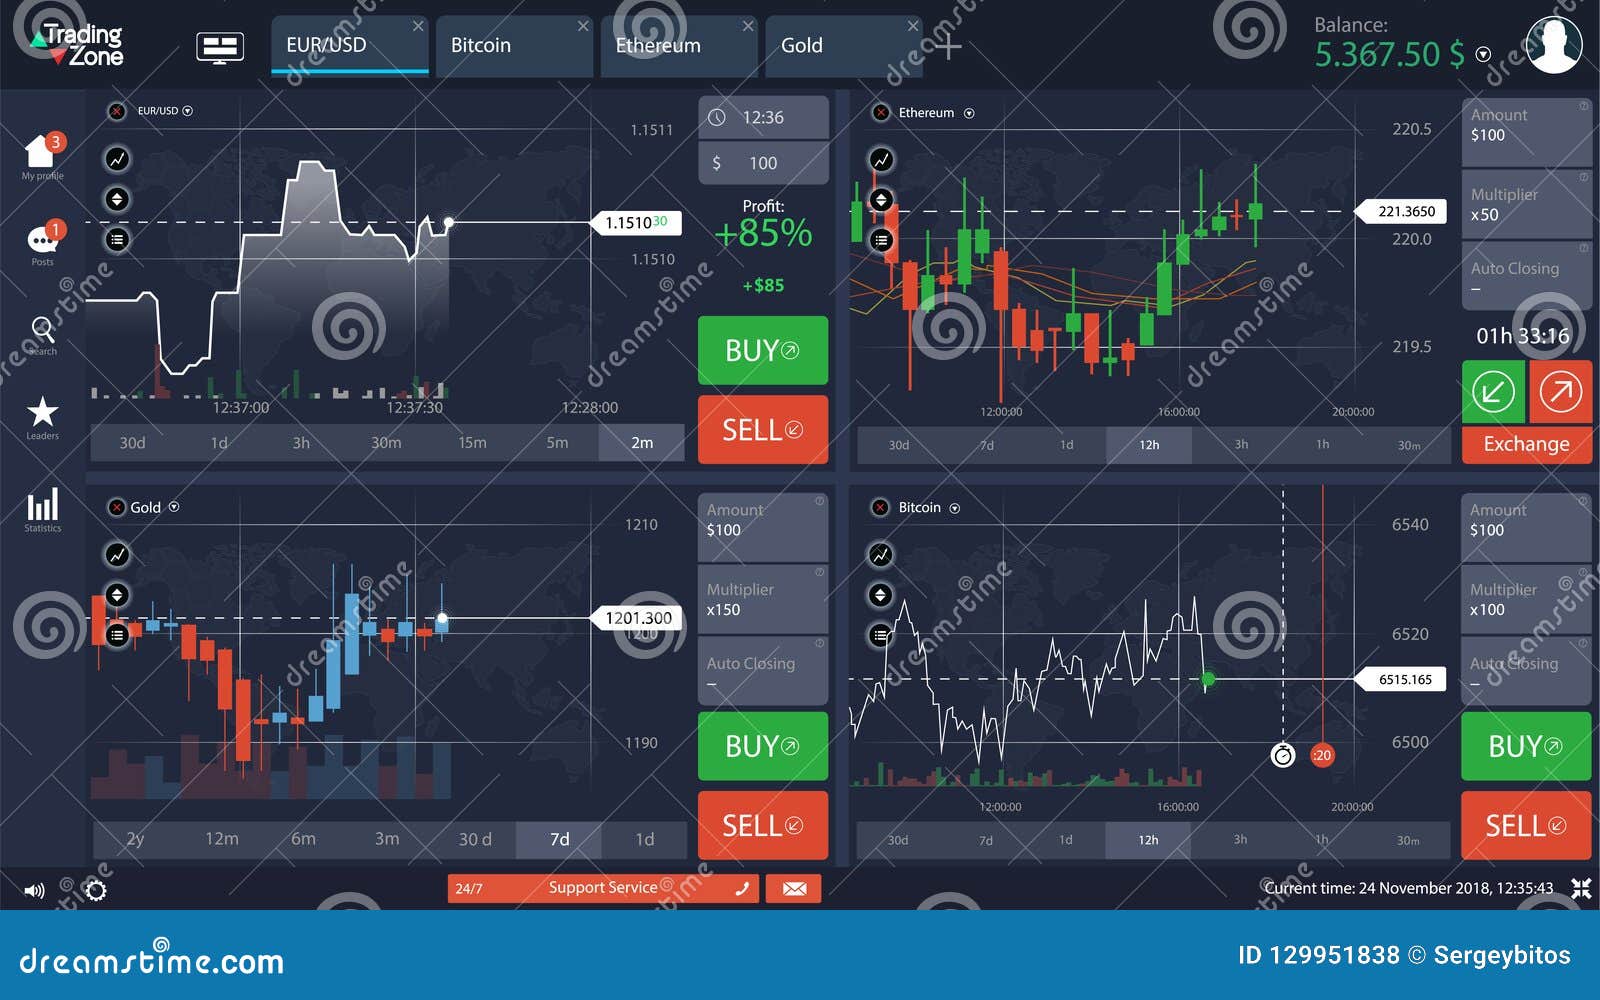 Ally invest binary options